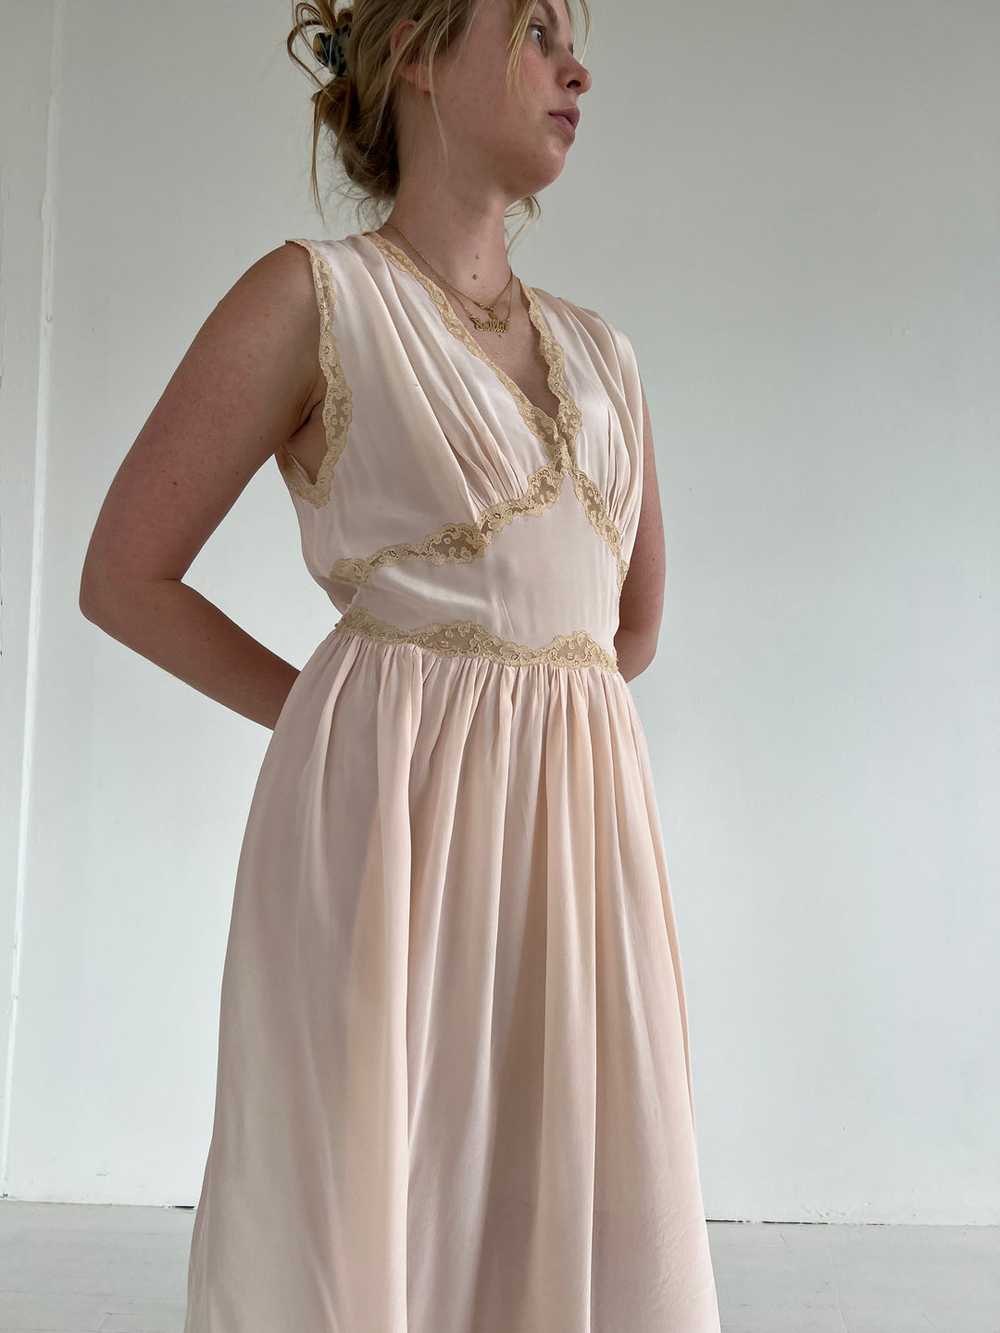 1930's Pale Pink Silk Slip Dress with Cream Lace - image 3